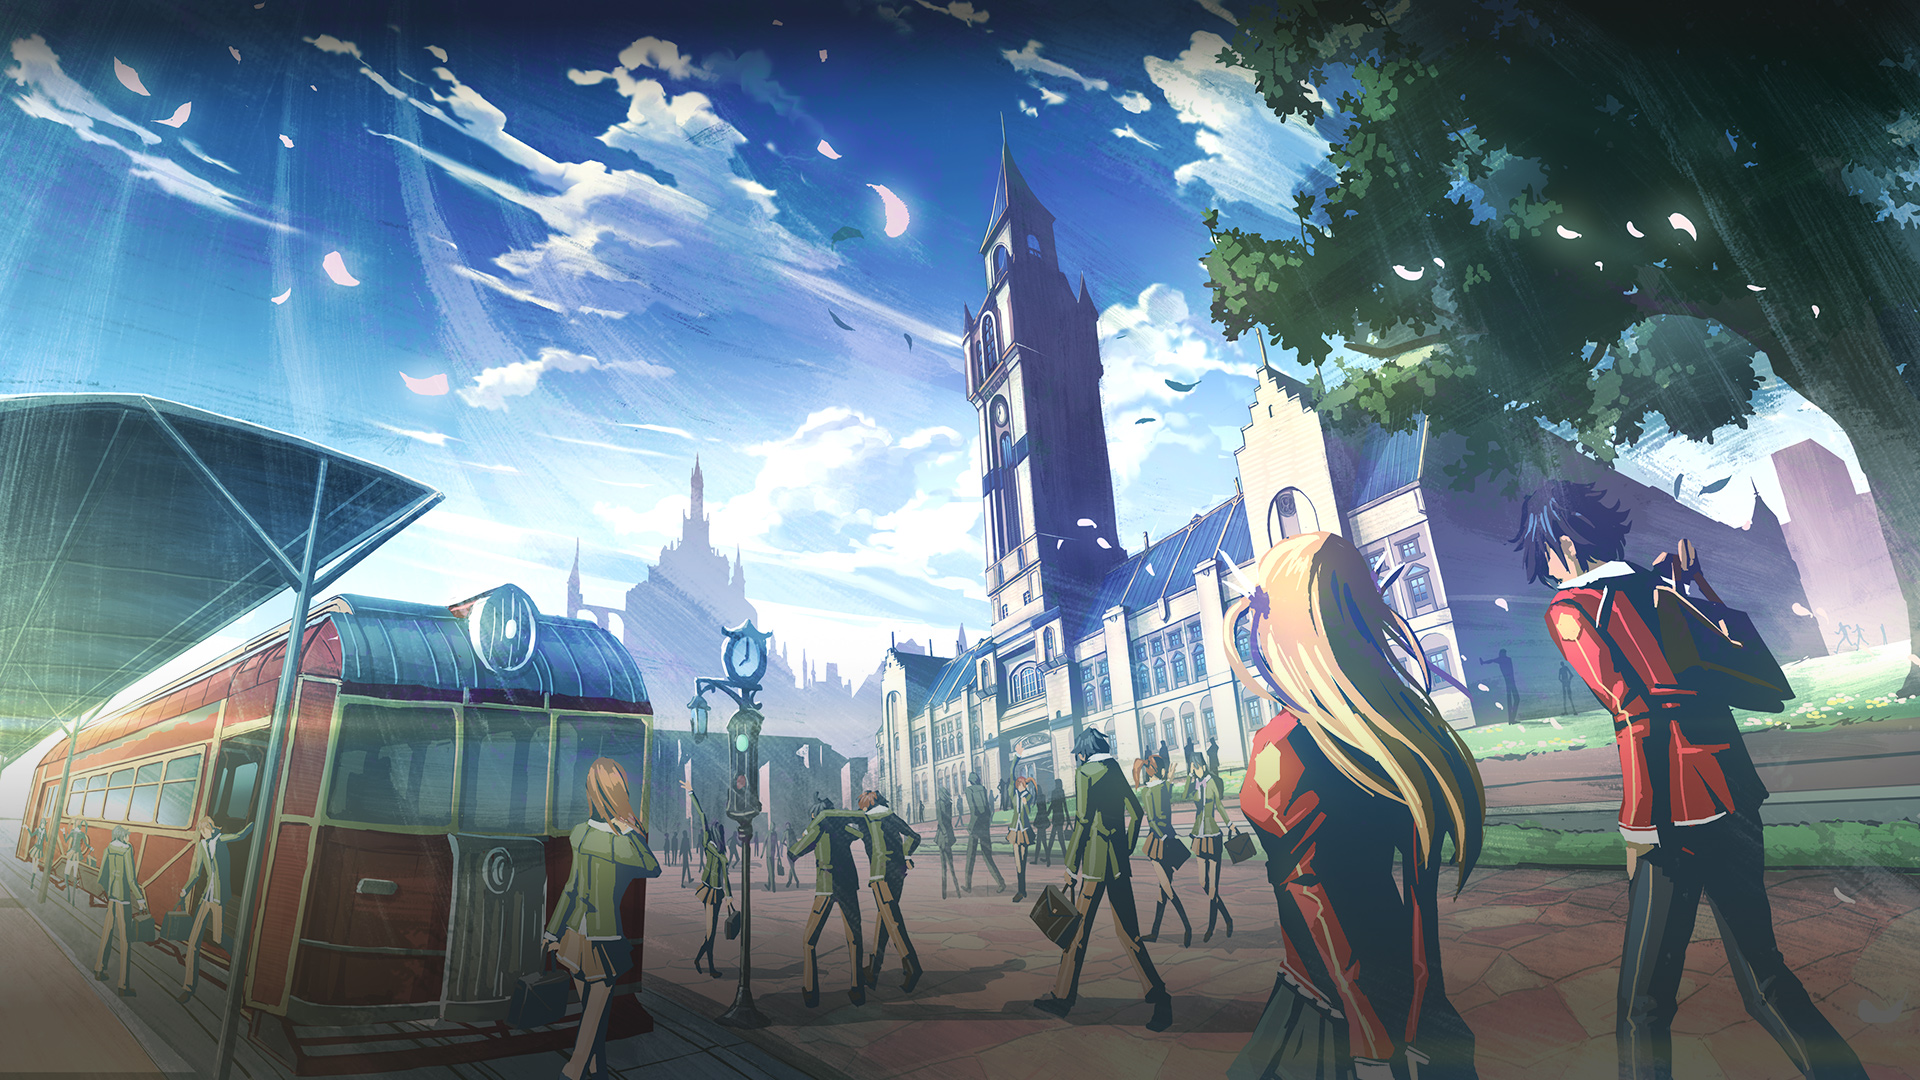 The Legend of Heroes: Trails into Reverie instal the new for android